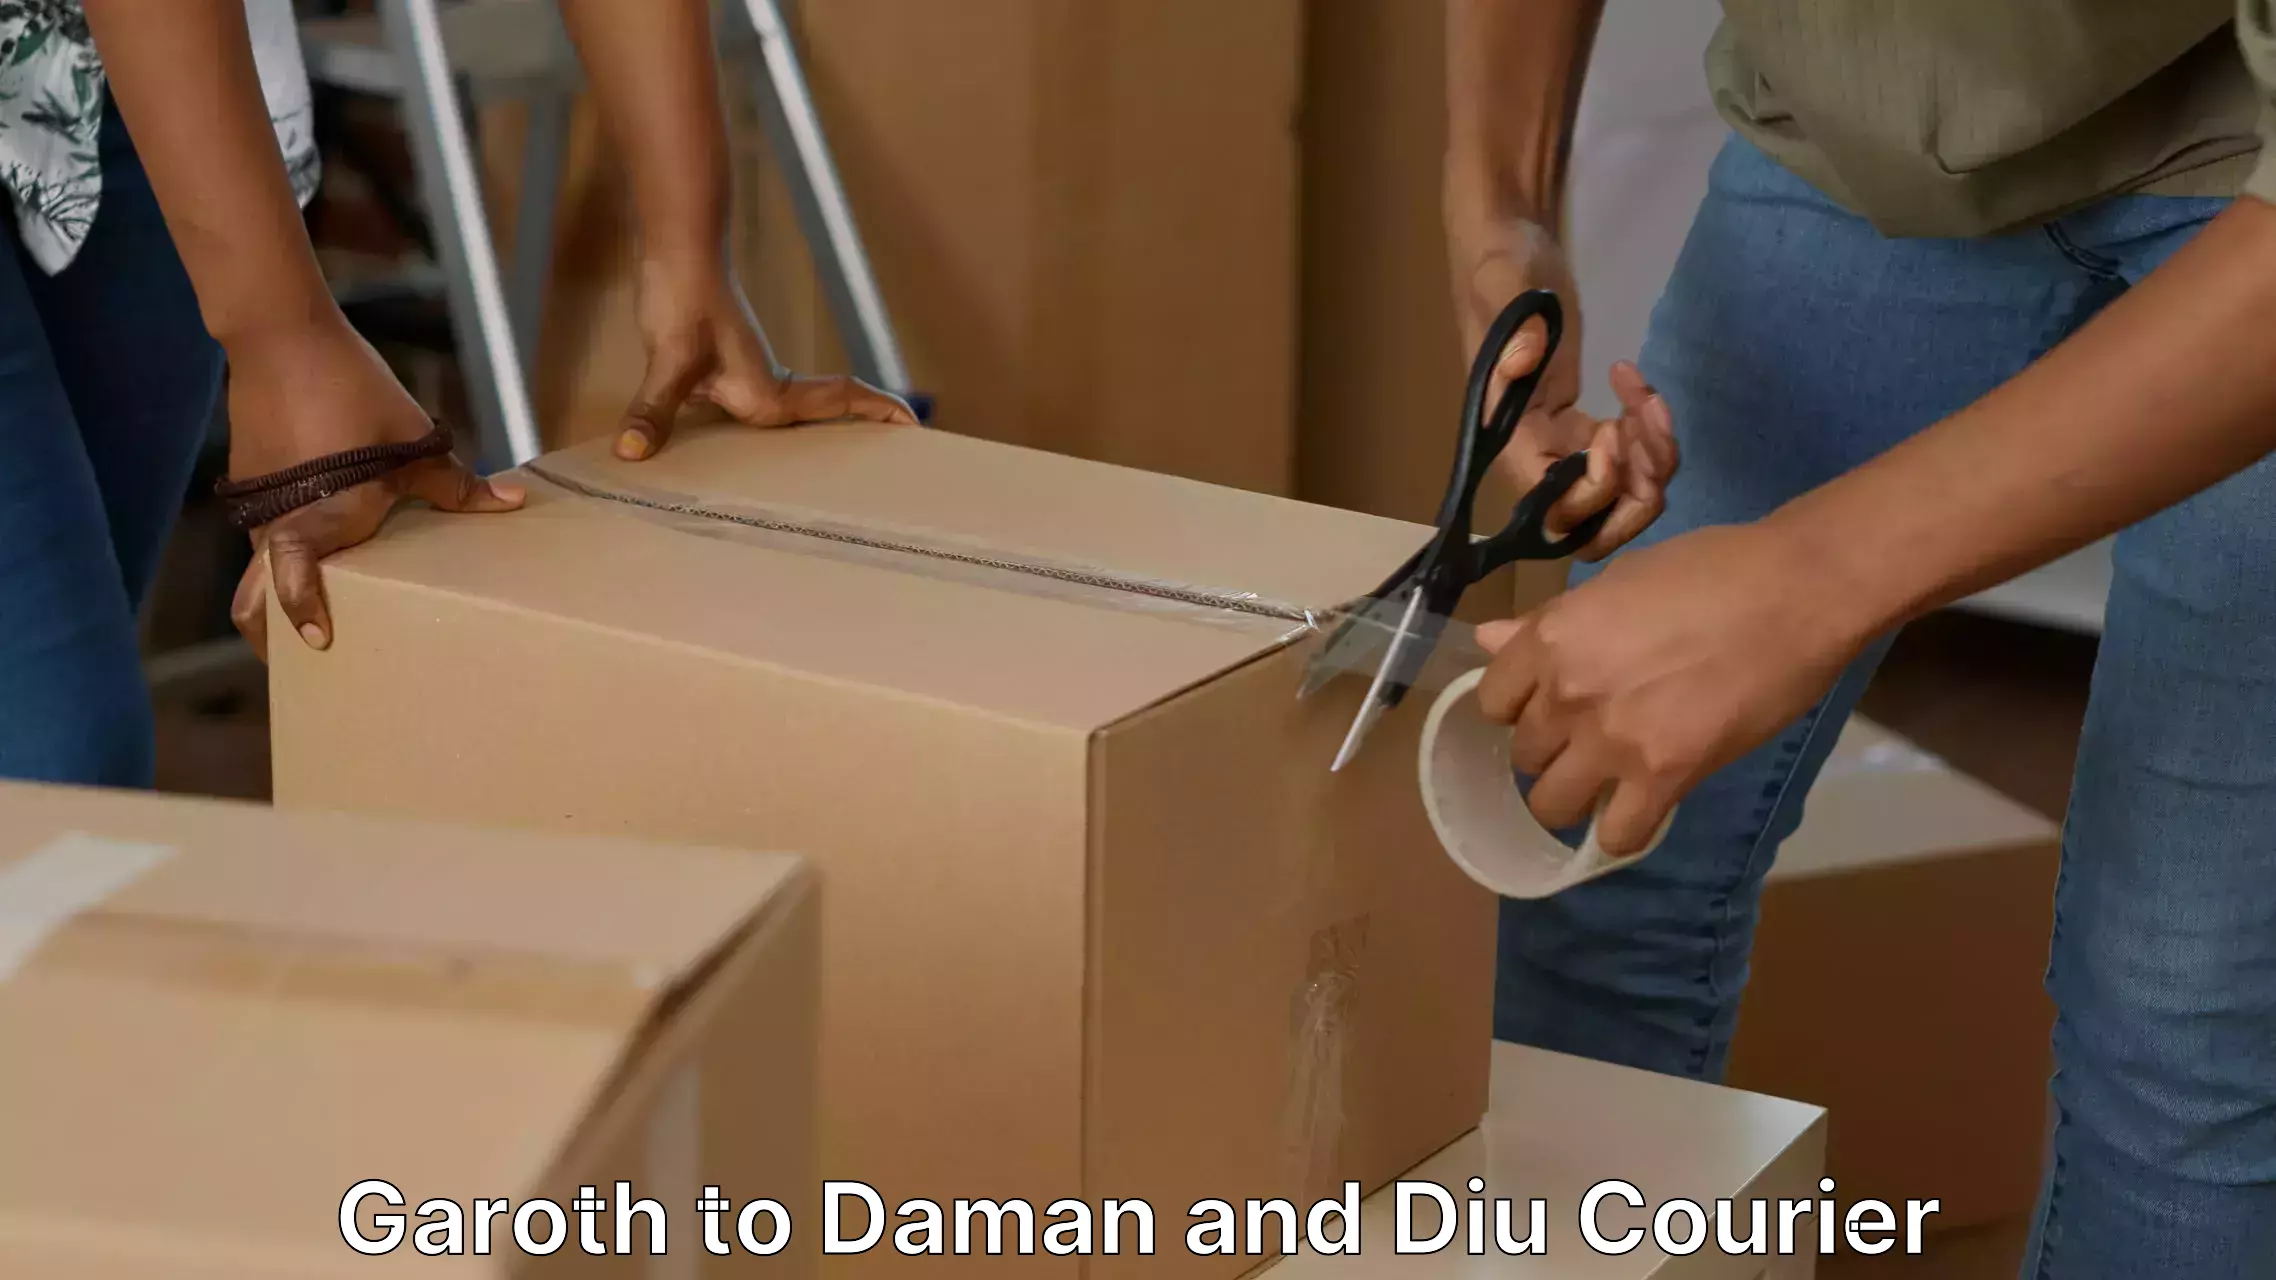 Trusted relocation experts Garoth to Daman and Diu